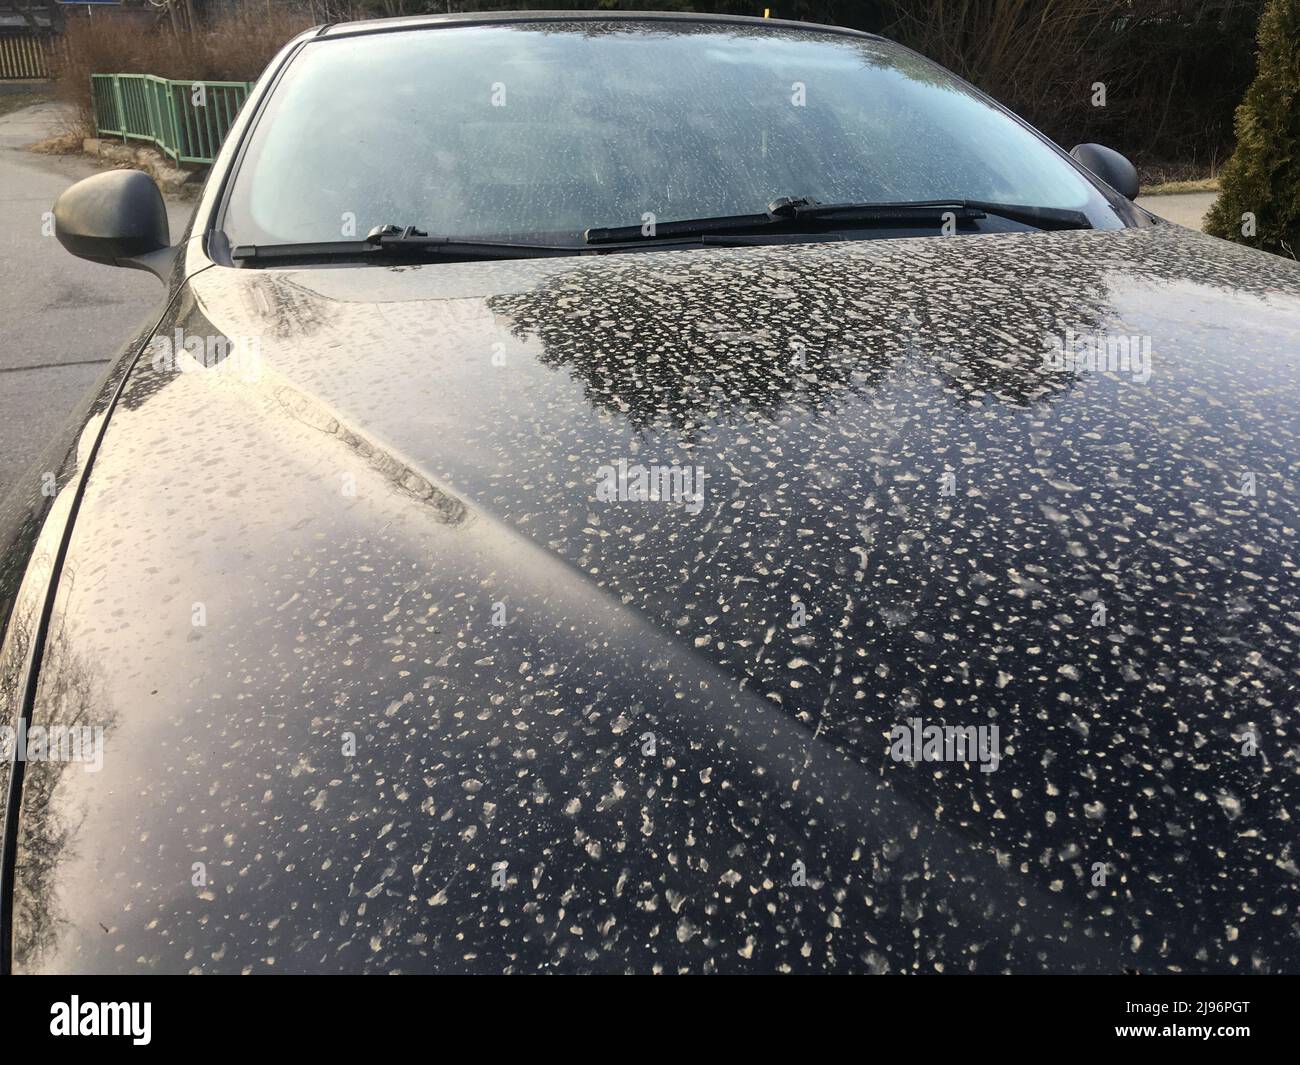 The detail of the remains of the desert dust on the car bonnet after the muddy rain. Not good for the varnish. Stock Photo